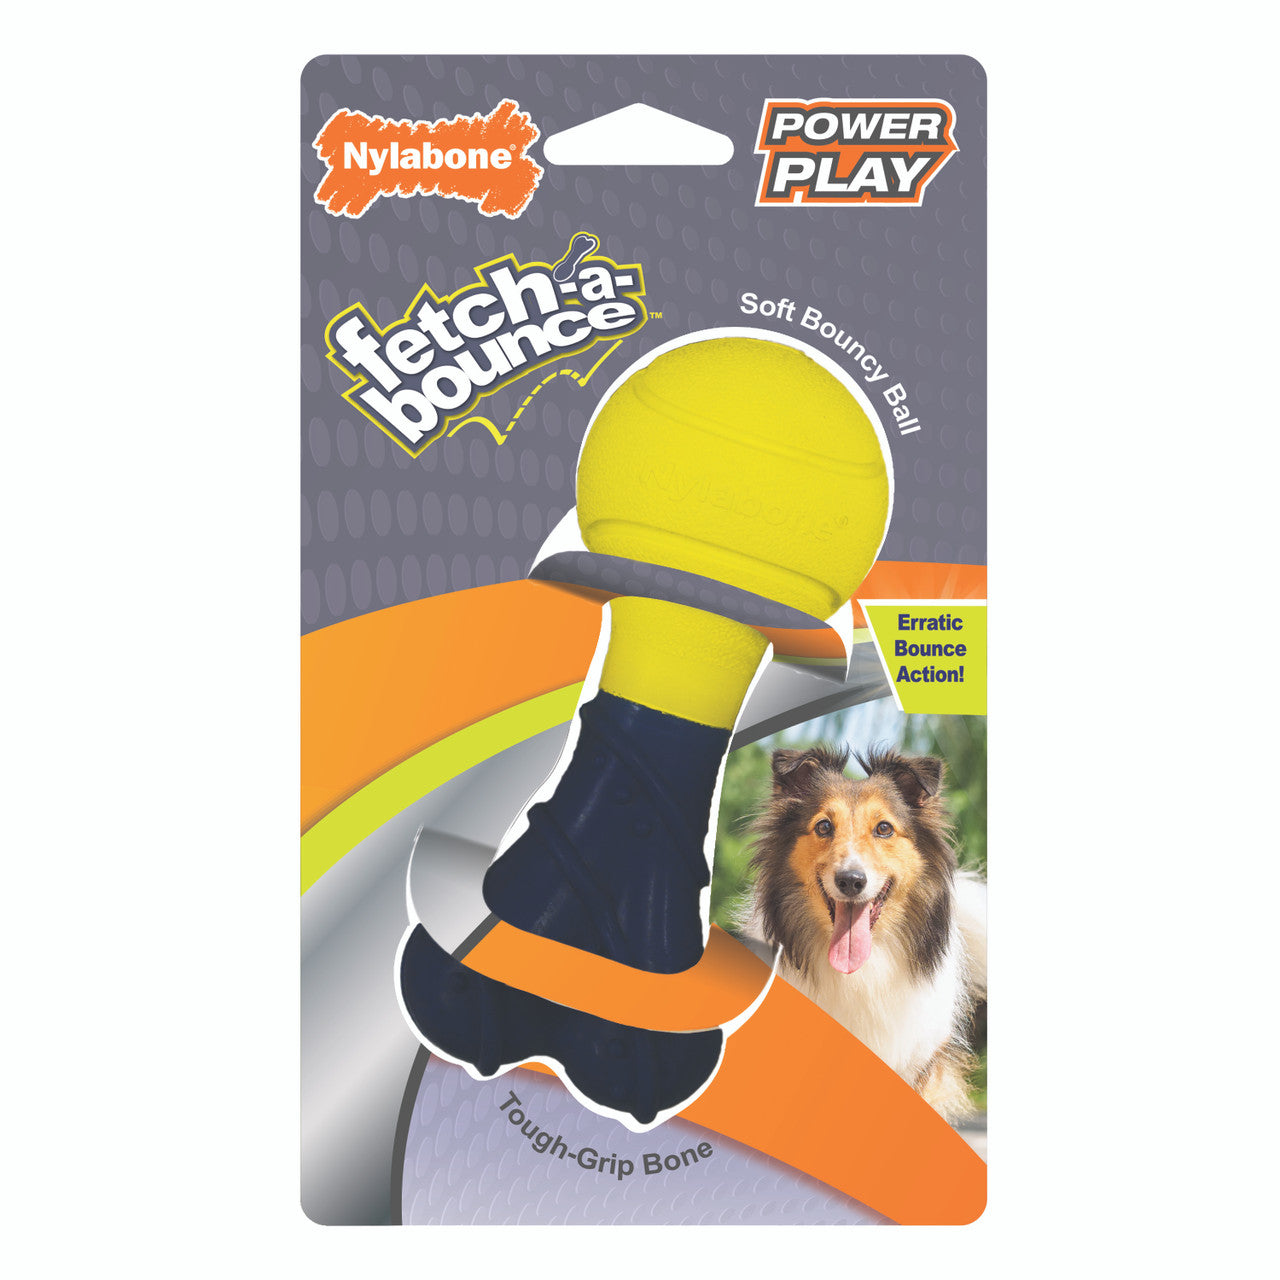 Nylabone Power Play Rubber Dog Toy Fetch-a-Bounce Small (1 Count)